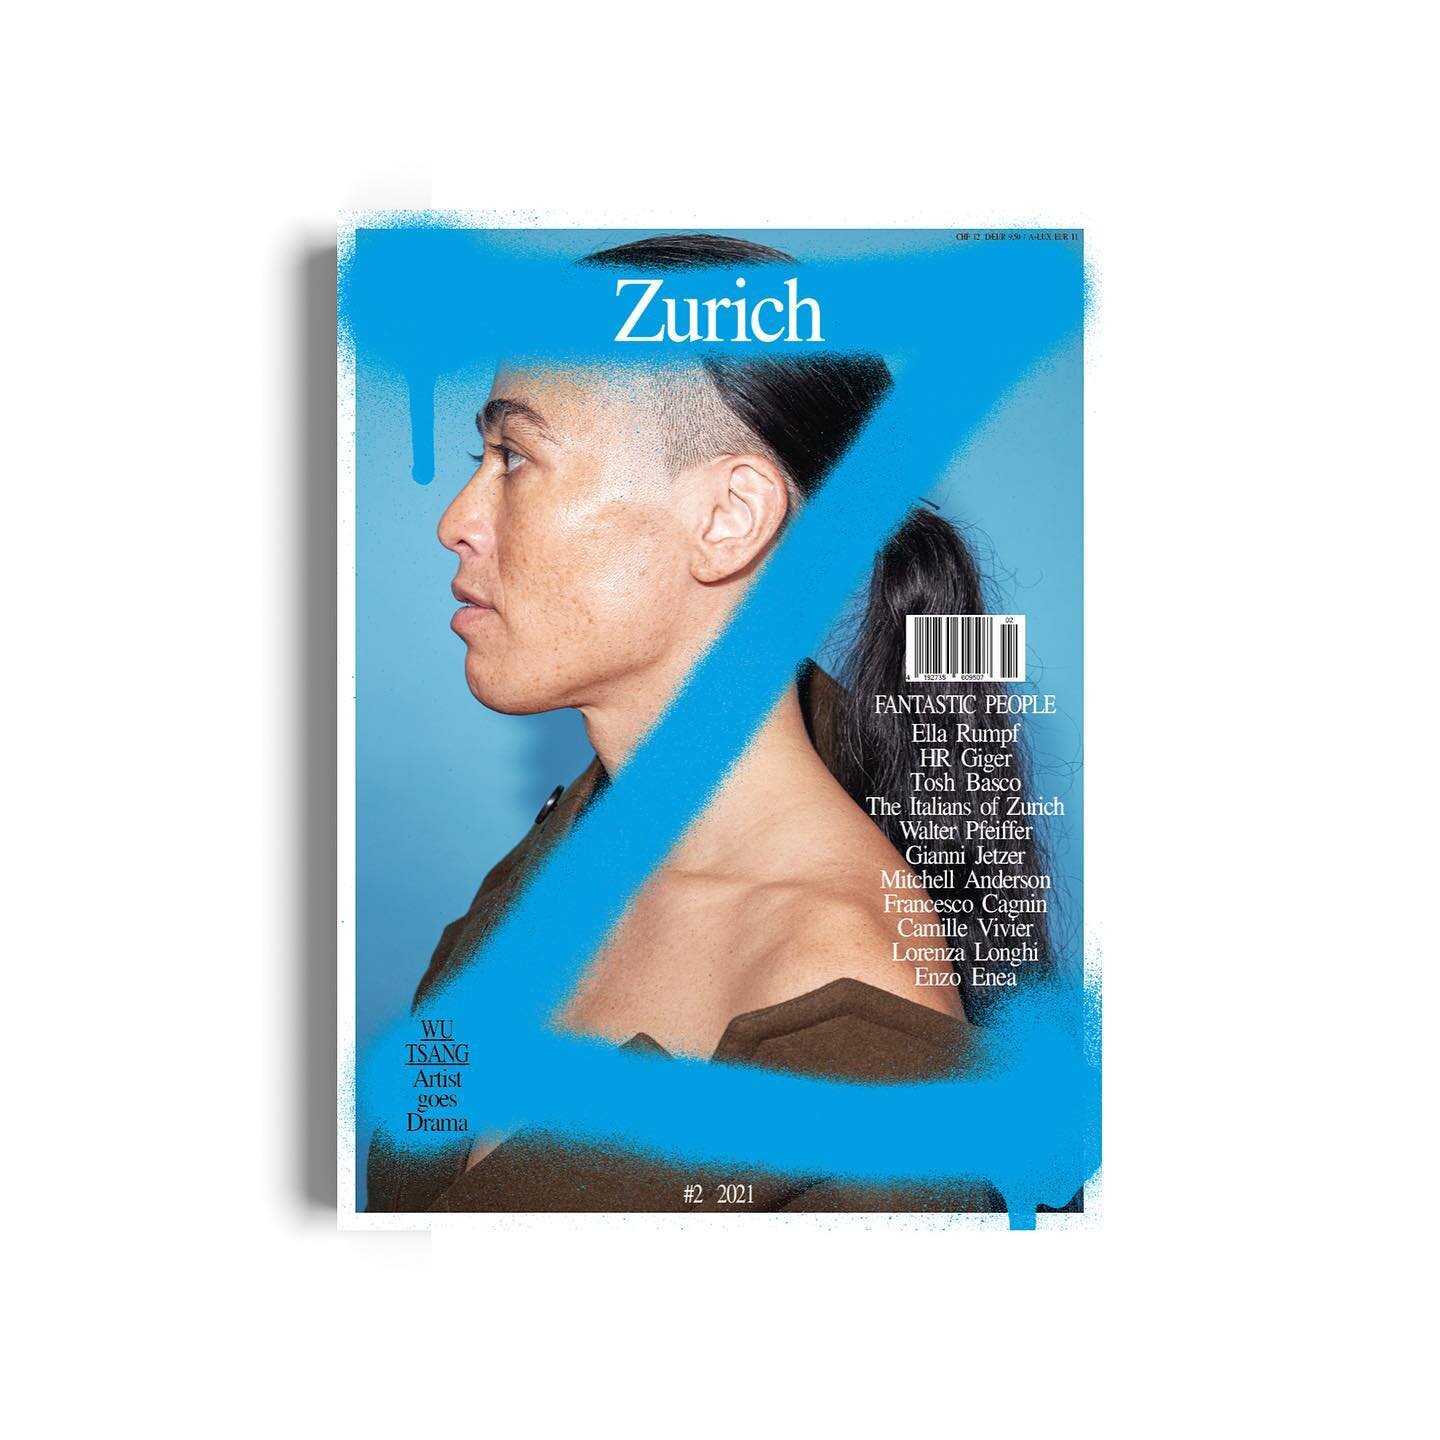 The second issue of Zurich Magazine has landed with more fantastic people featuring Walter Pfeiffer, Ella Rumpf, HR Giger and many more. ❤️